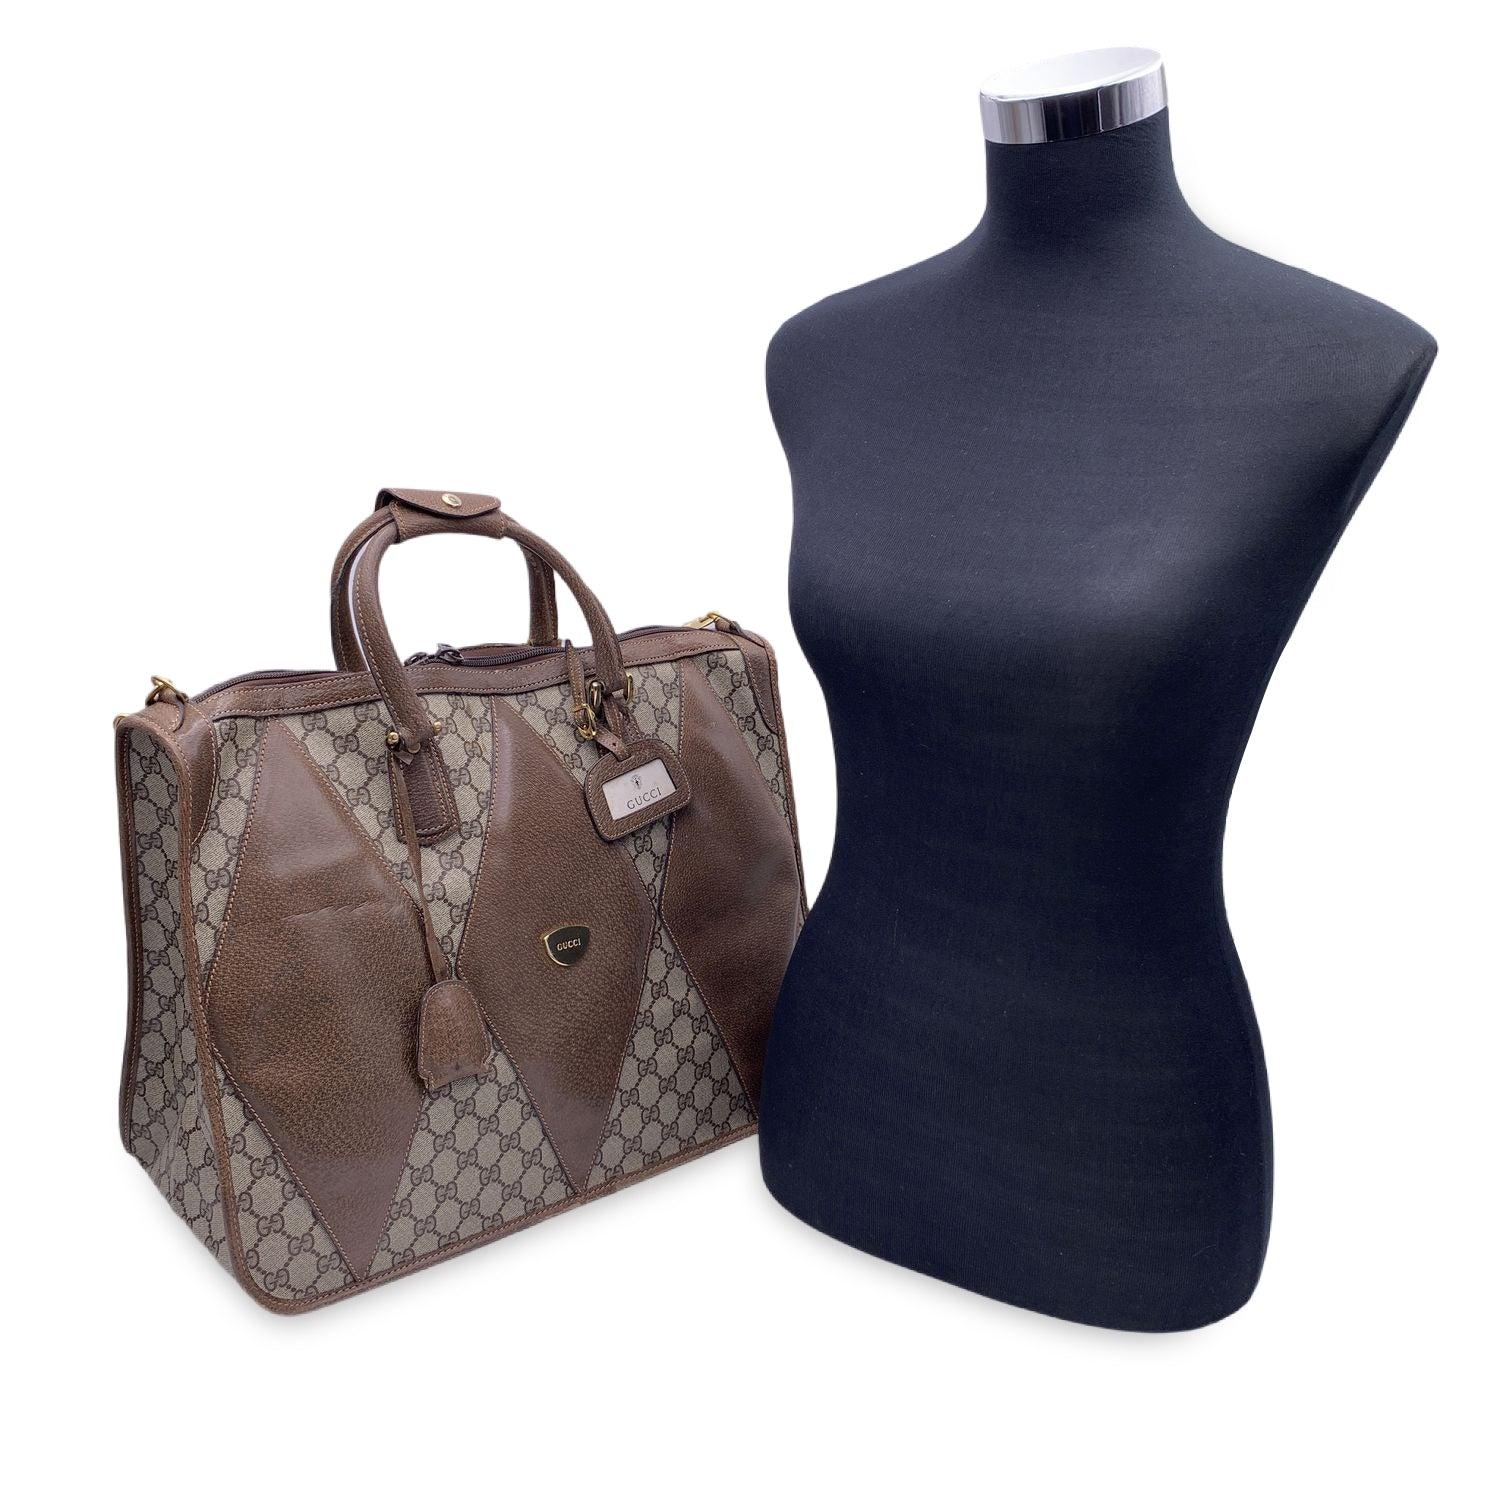 Beautiful Gucci tote made in brown monogram canvas with brown leather trim and handles. brown leather diamond panel on the front and on the back. Gucci gold metal logo tab on the front. Double top carry handles and removable shoulder strap. Address